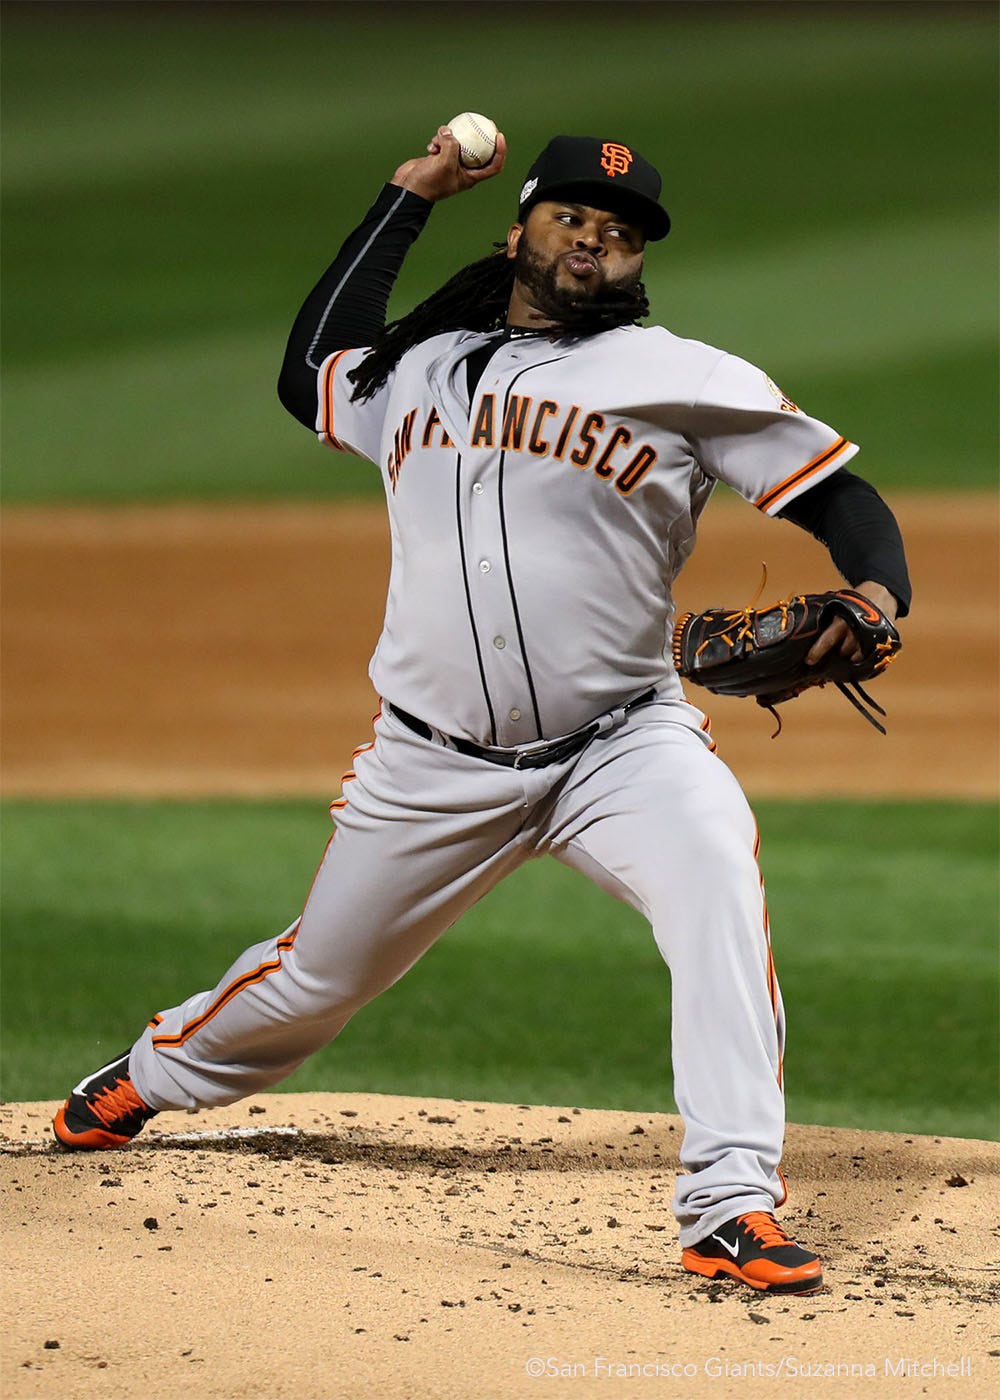 Johnny Cueto pitched eighth innings.